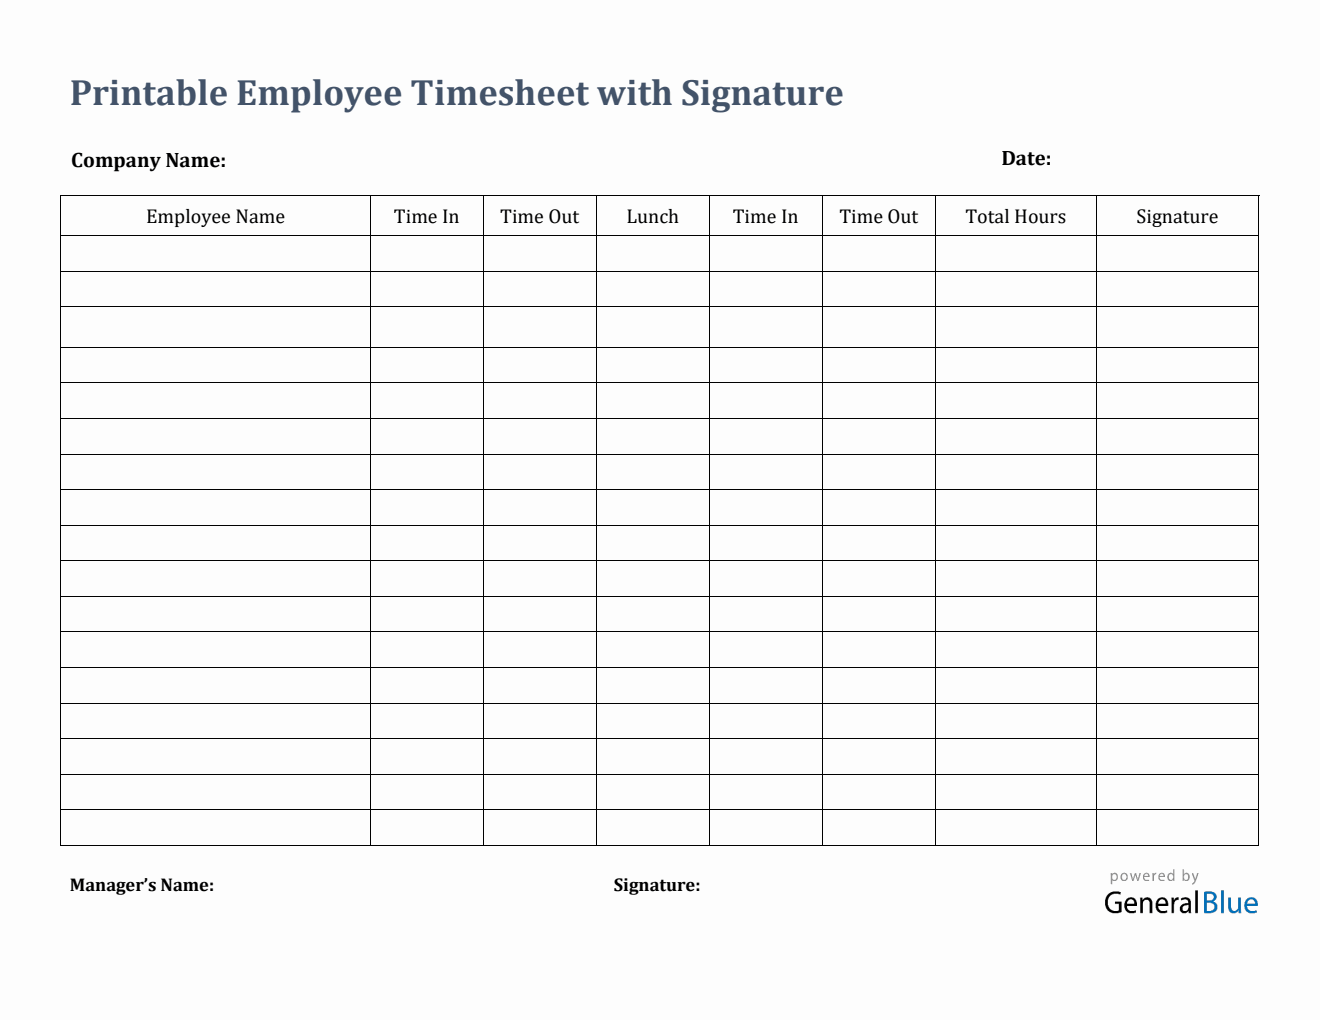 Printable Employee Timesheet With Signature in PDF